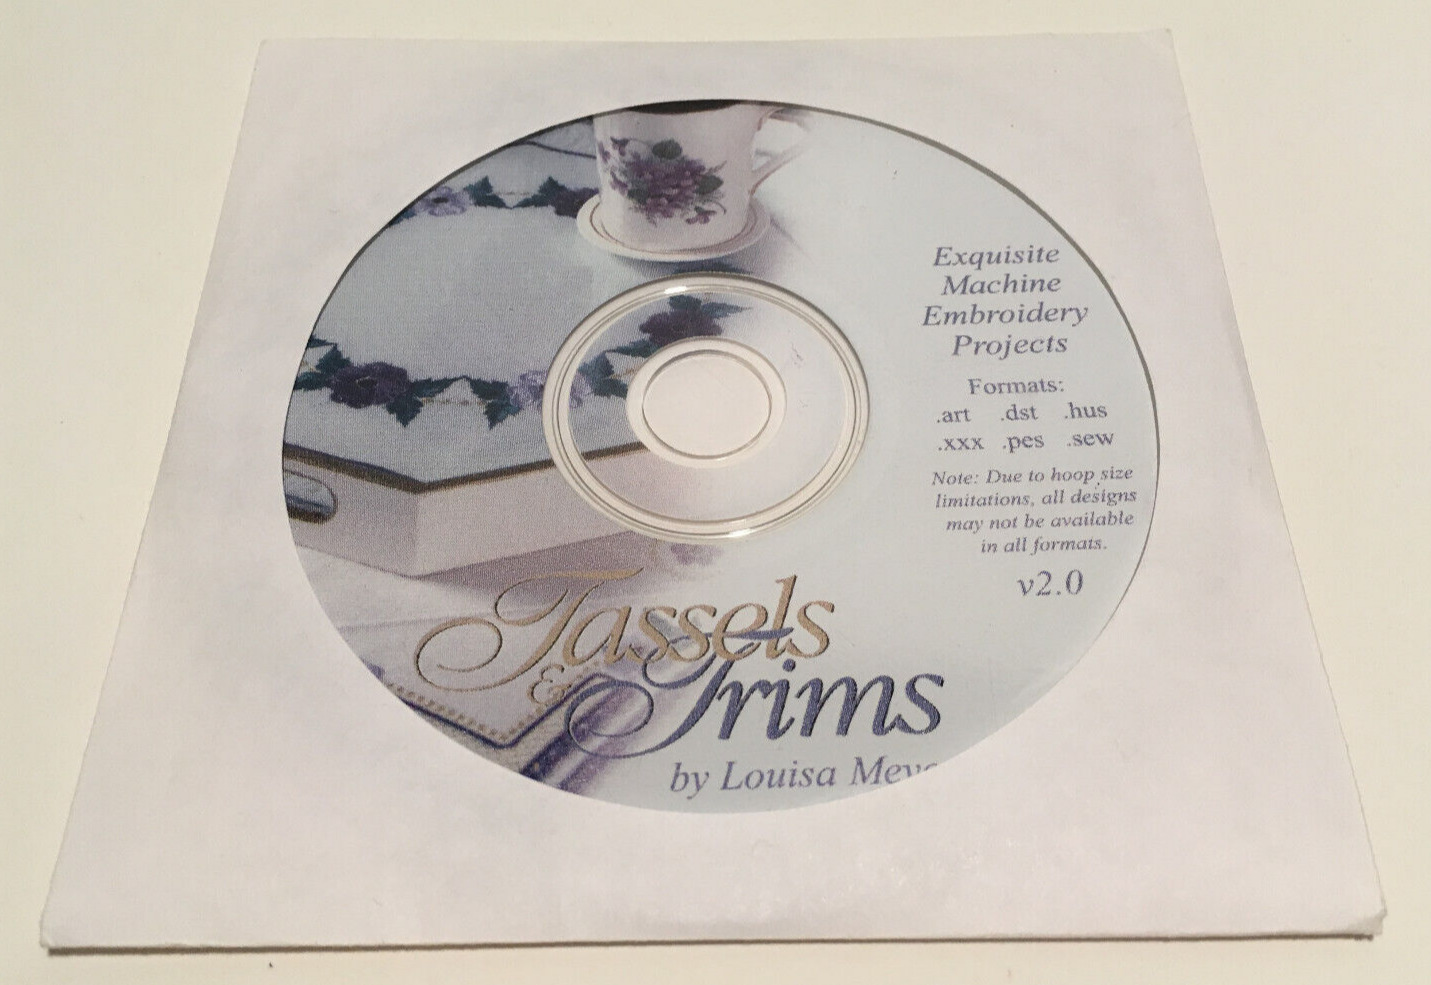 Tassels Trims By Louisa Meyer Exquisite Machine Embroidery Projects CD v2.0